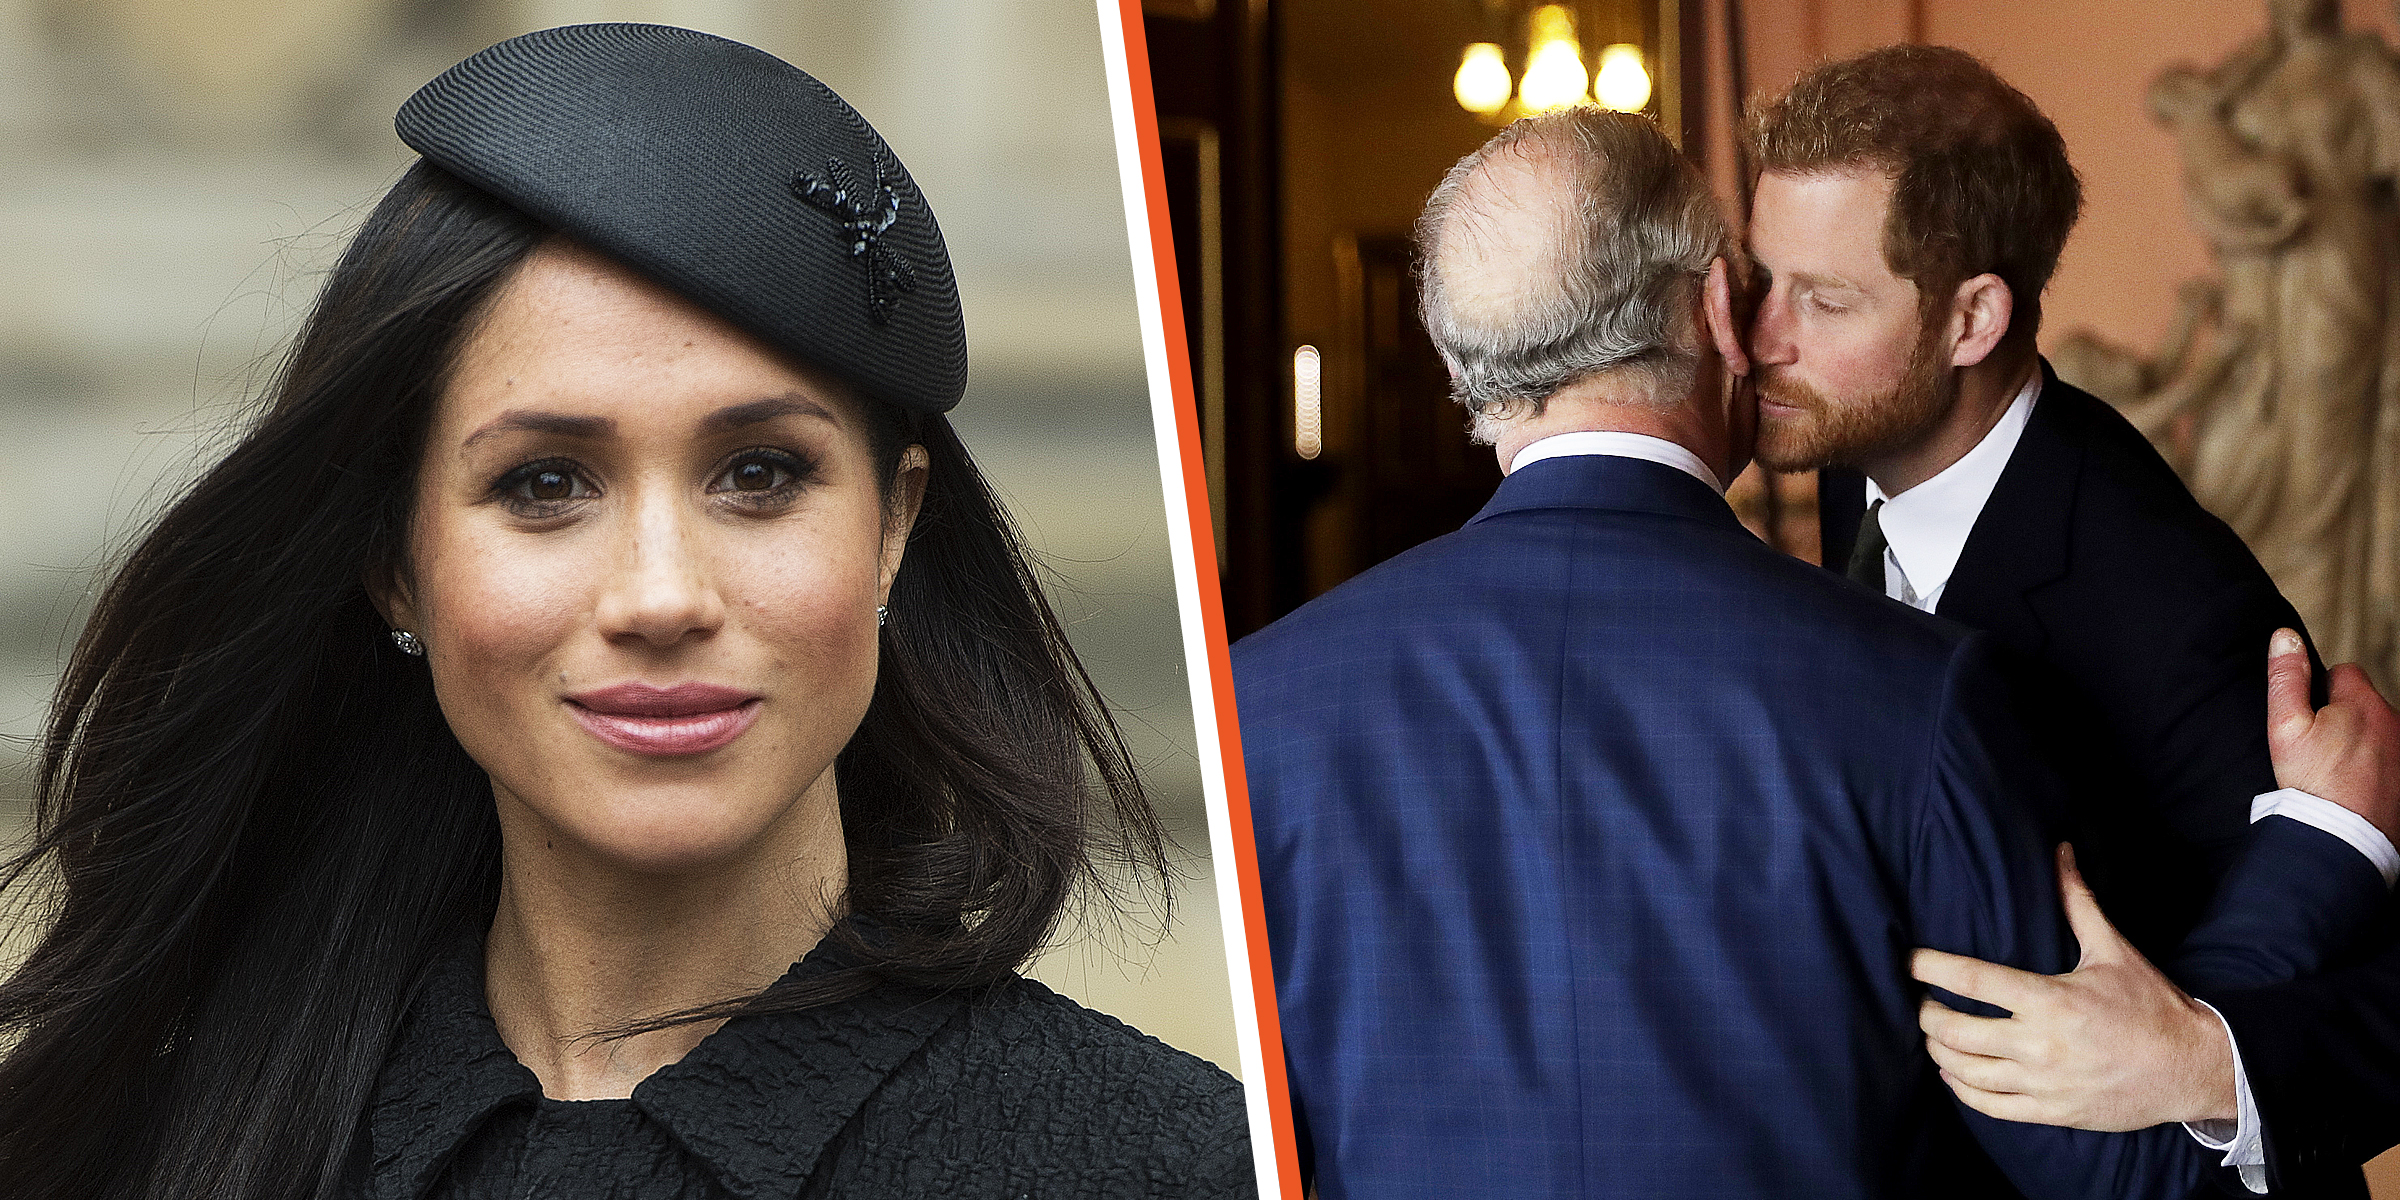 Meghan Markle | King Charles III and Prince Harry | Source: Getty Images